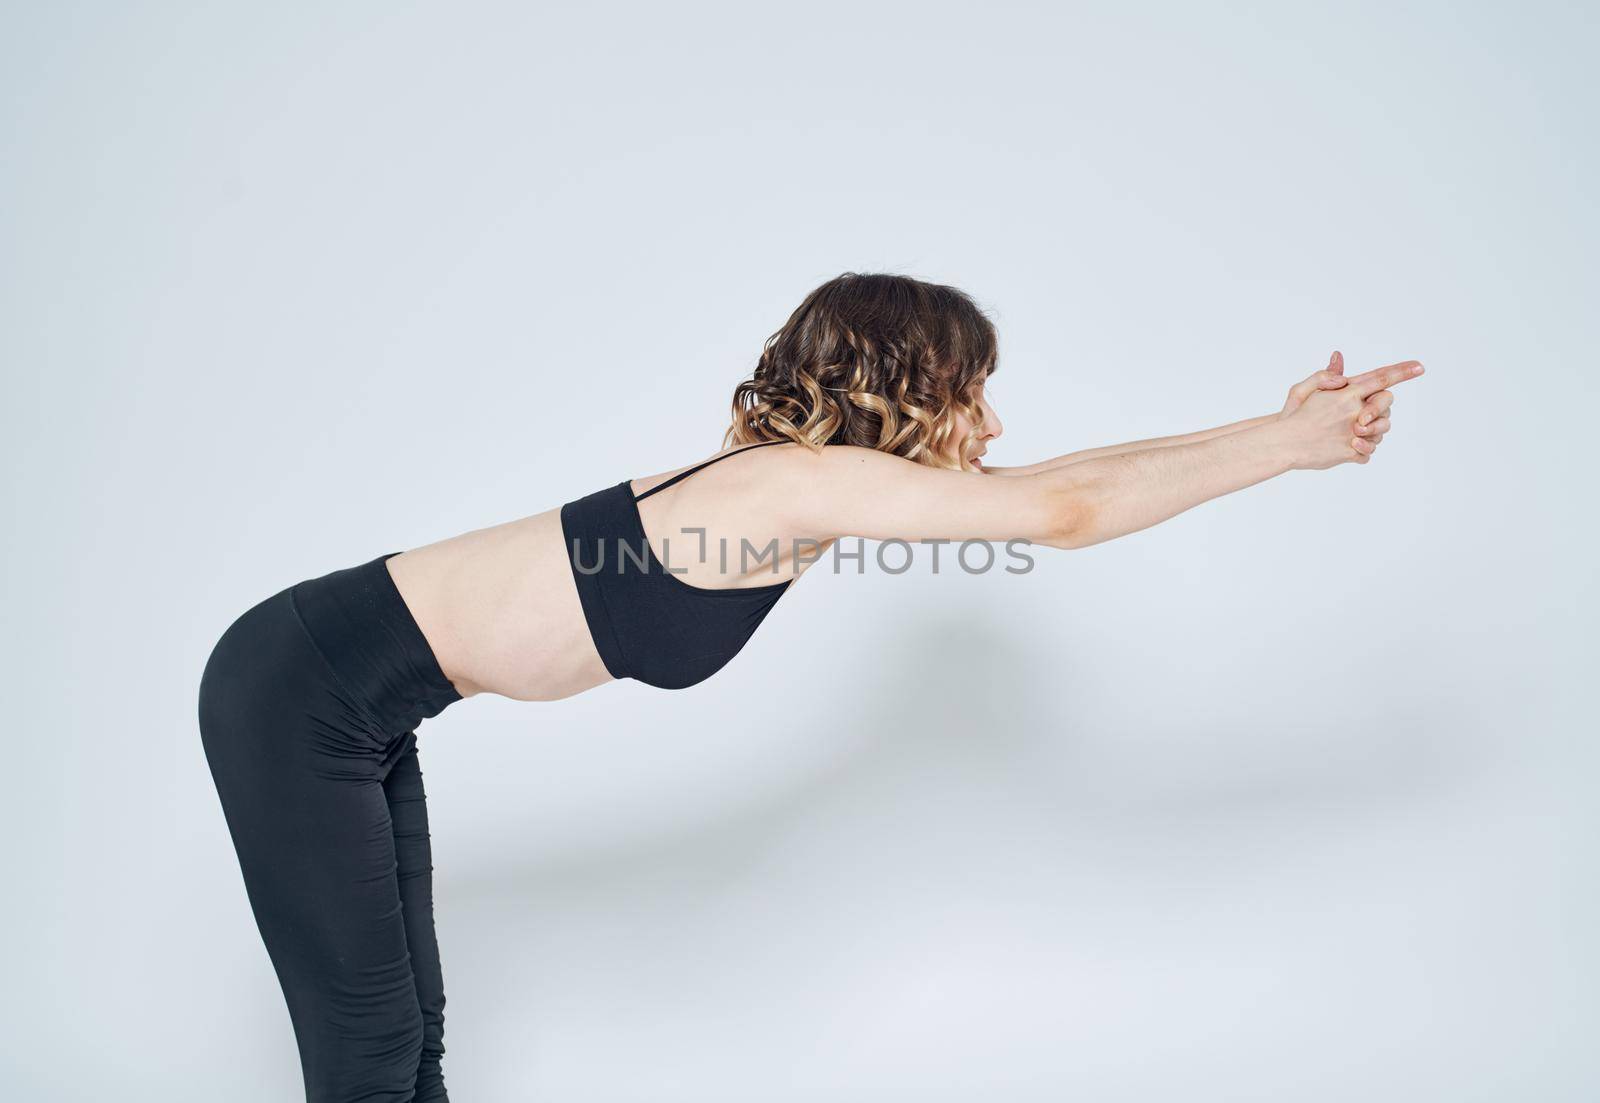 A sportive woman in leggings and a short T-shirt is gesturing with her hands on a light background. High quality photo